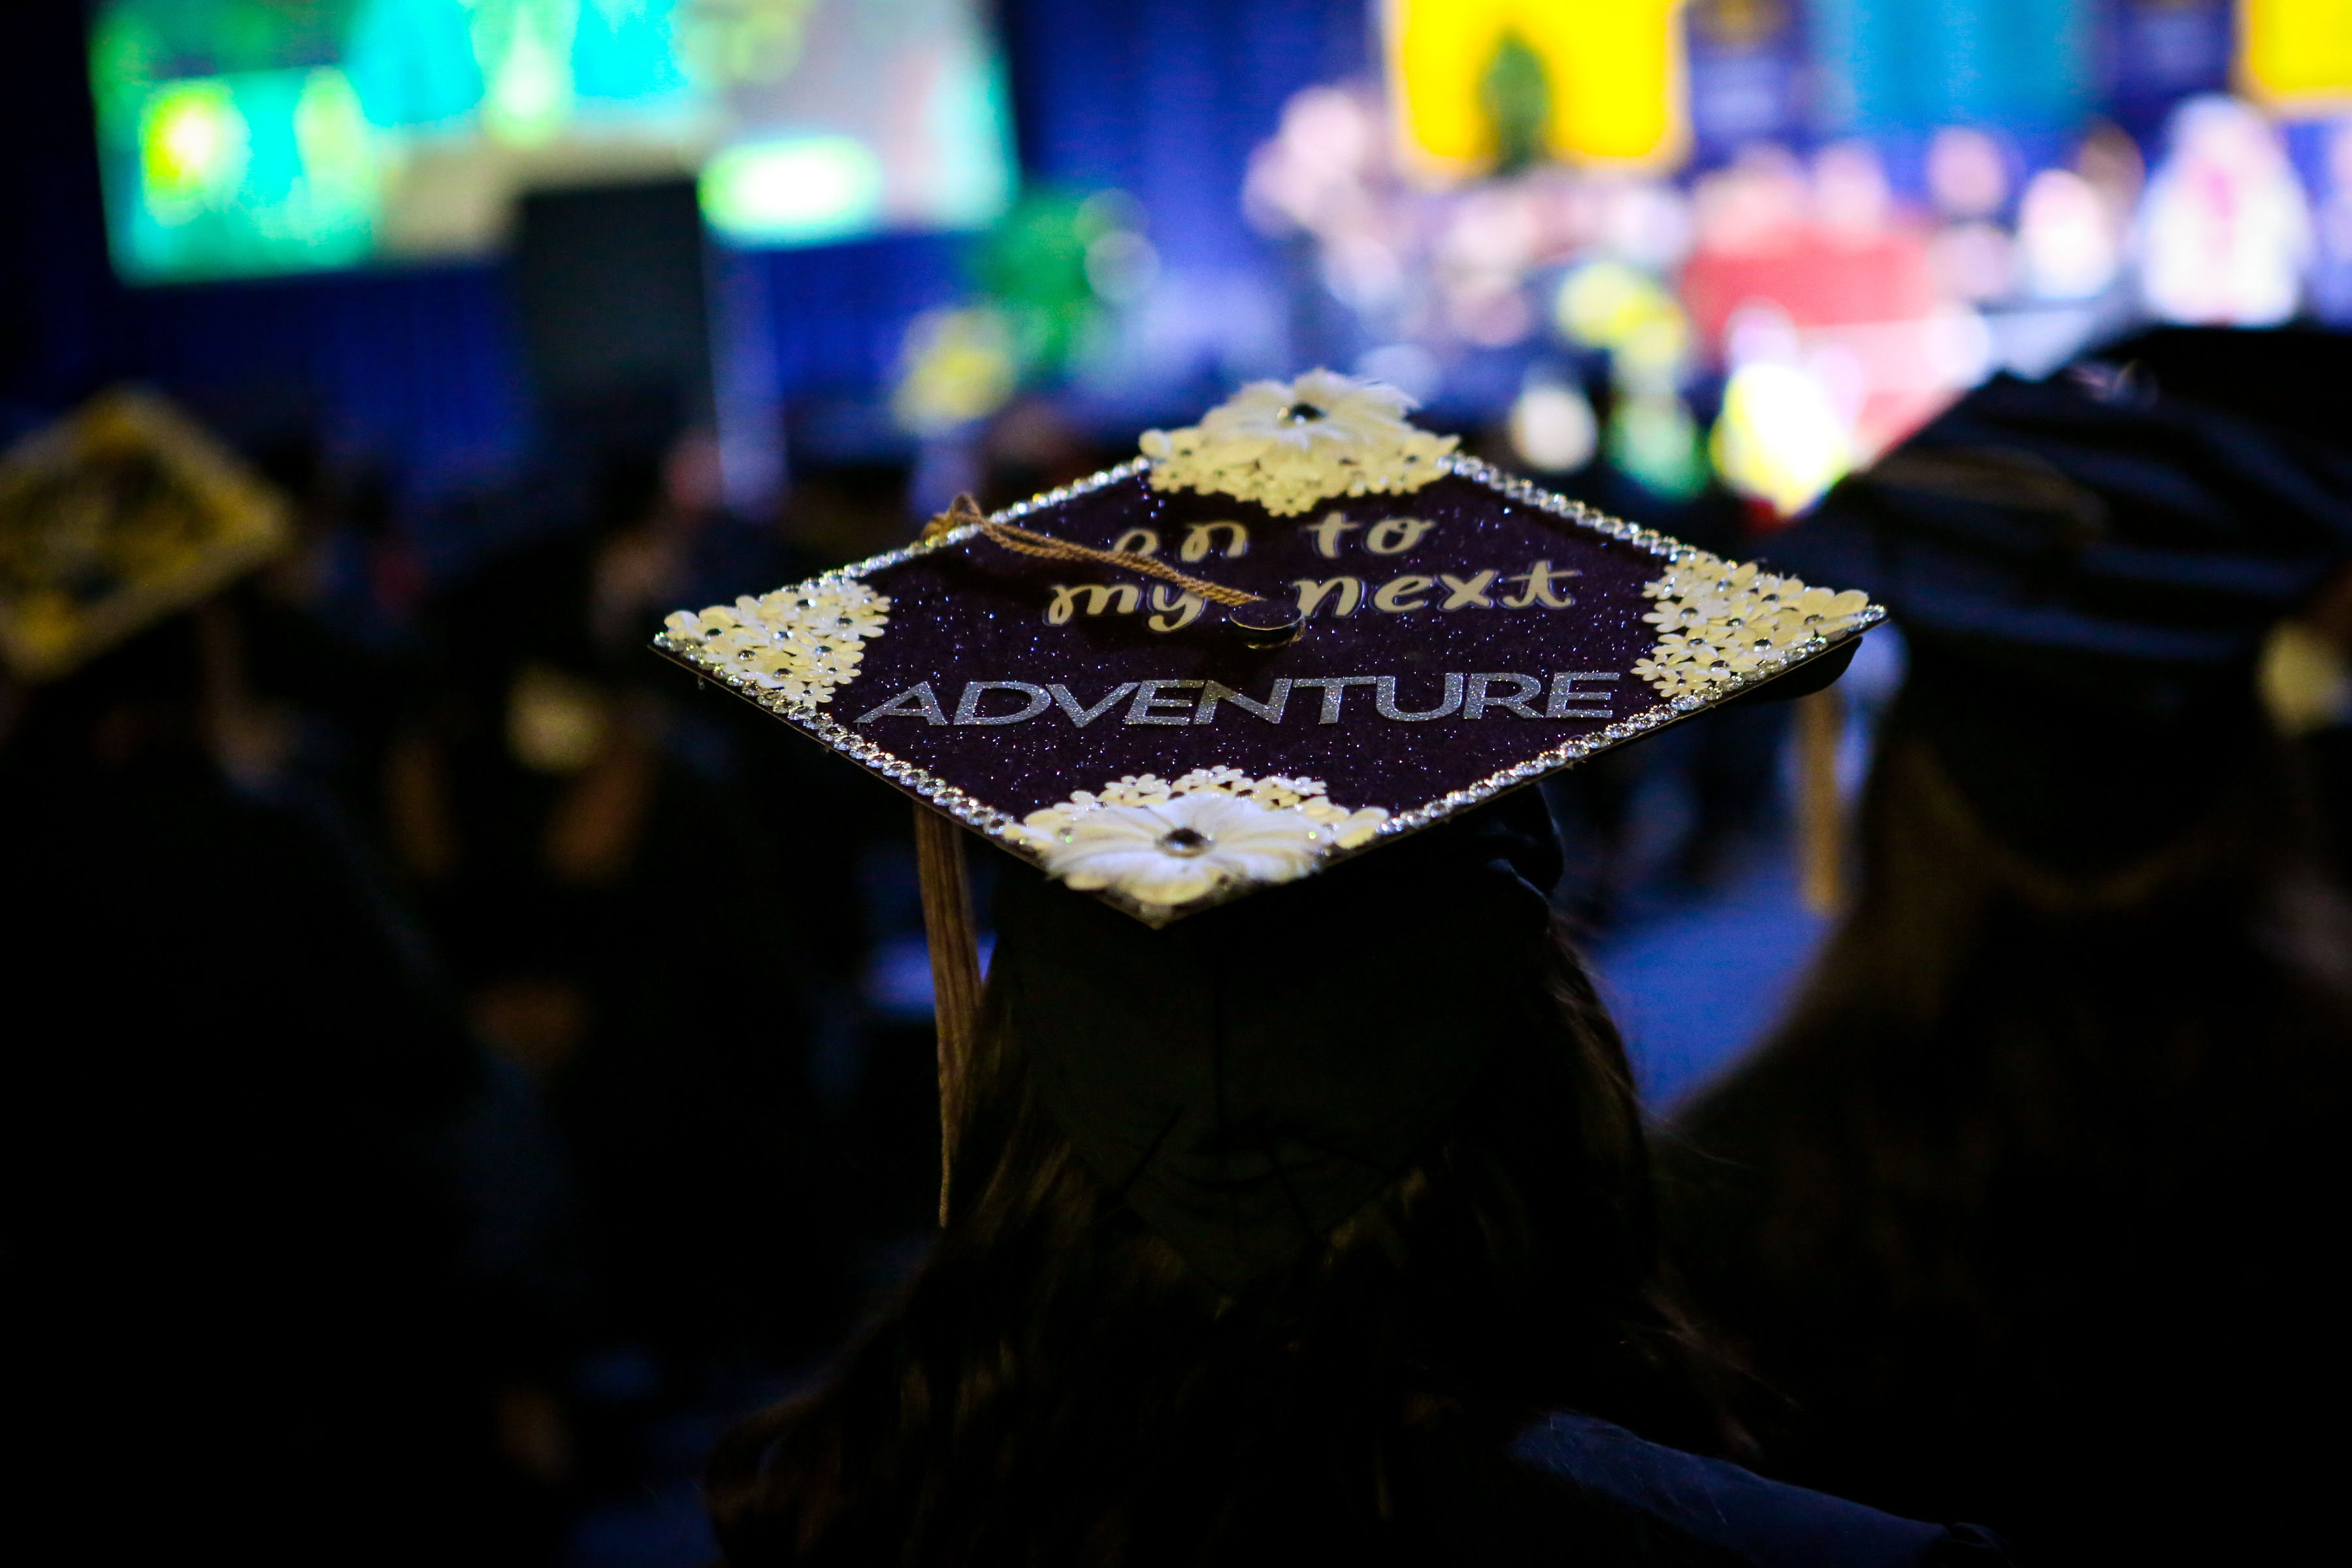 Graduation mortar board that says "On to the next adventure" 